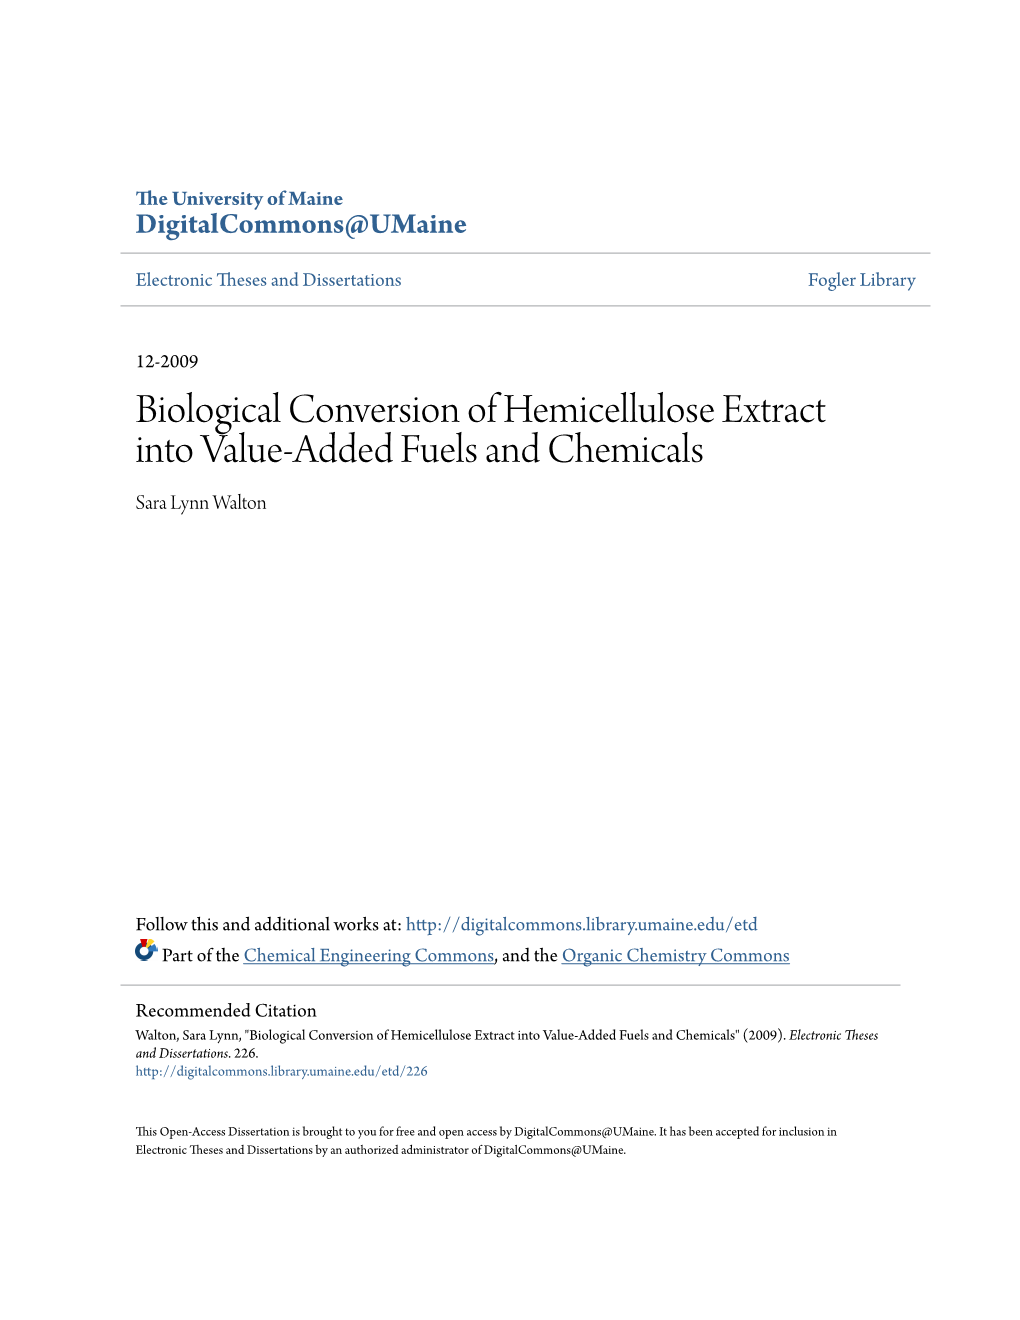 Biological Conversion of Hemicellulose Extract Into Value-Added Fuels and Chemicals Sara Lynn Walton